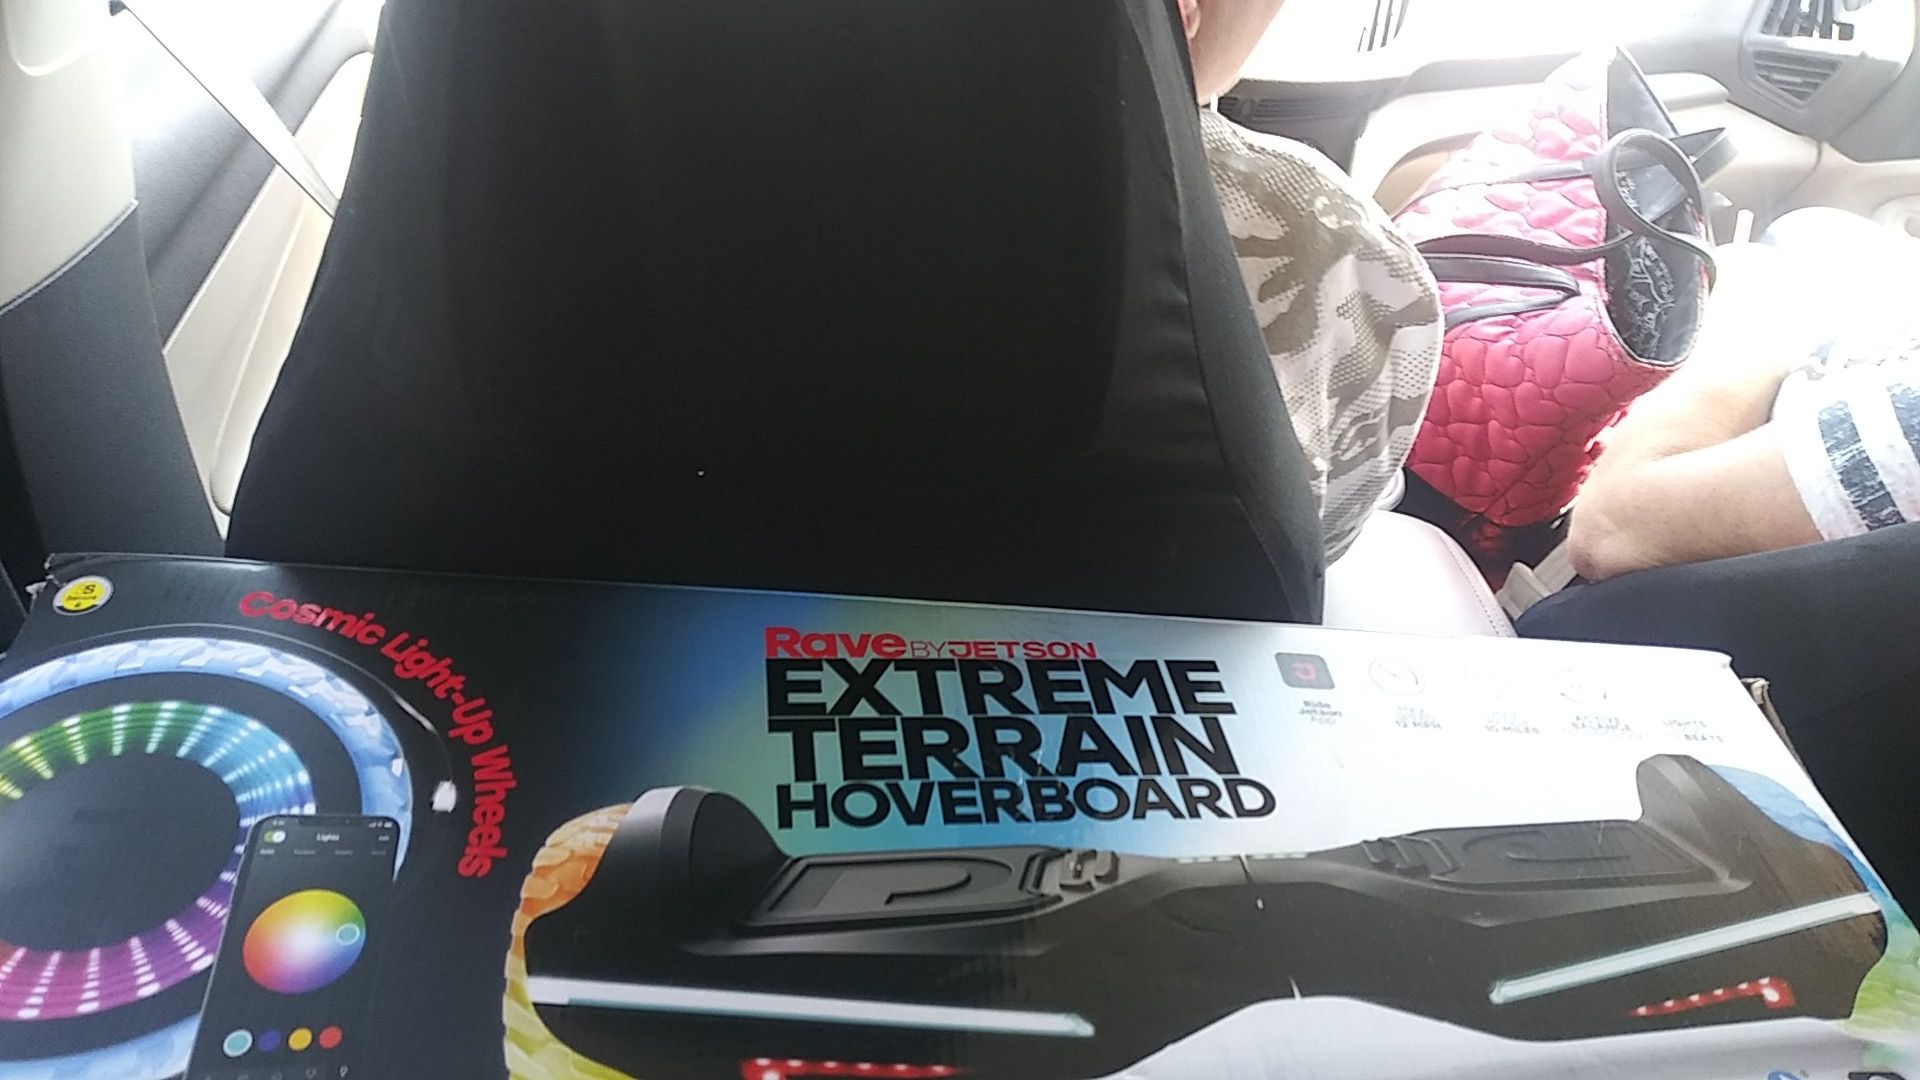 Rave by jetson extreme terrain hoverboard